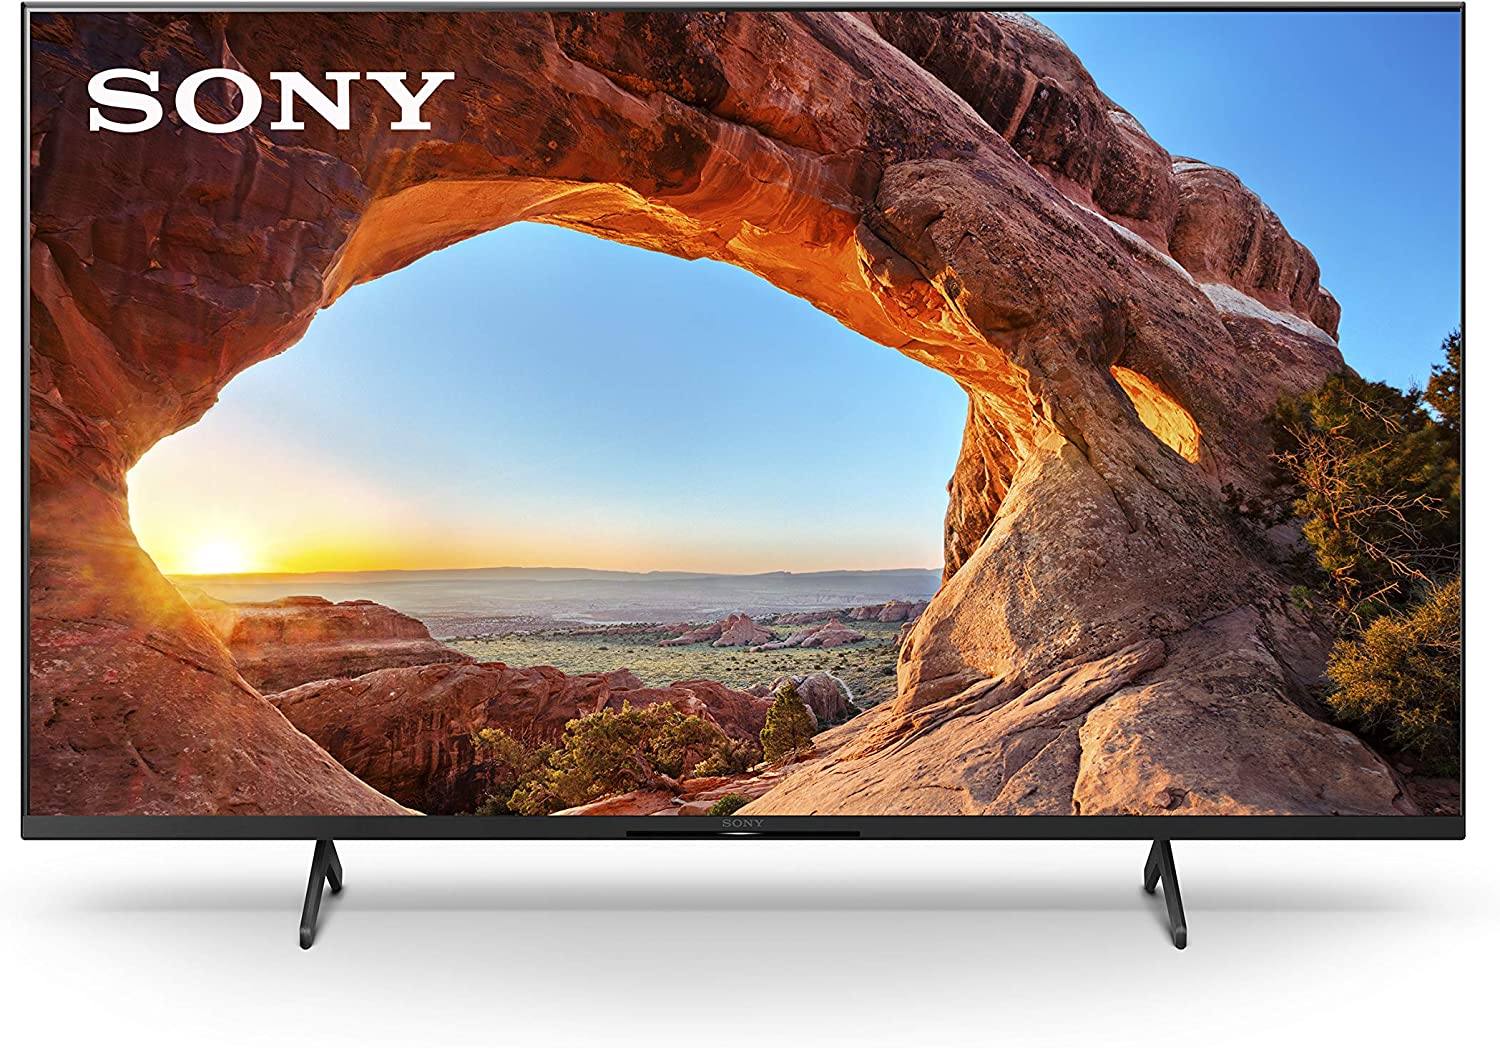 Sony X85J 50 Inch TV: 4K Ultra HD LED Smart Google TV with Native 120HZ Refresh Rate, Dolby Vision HDR, and Alexa Compatibility KD50X85J- 2021 Model, Black